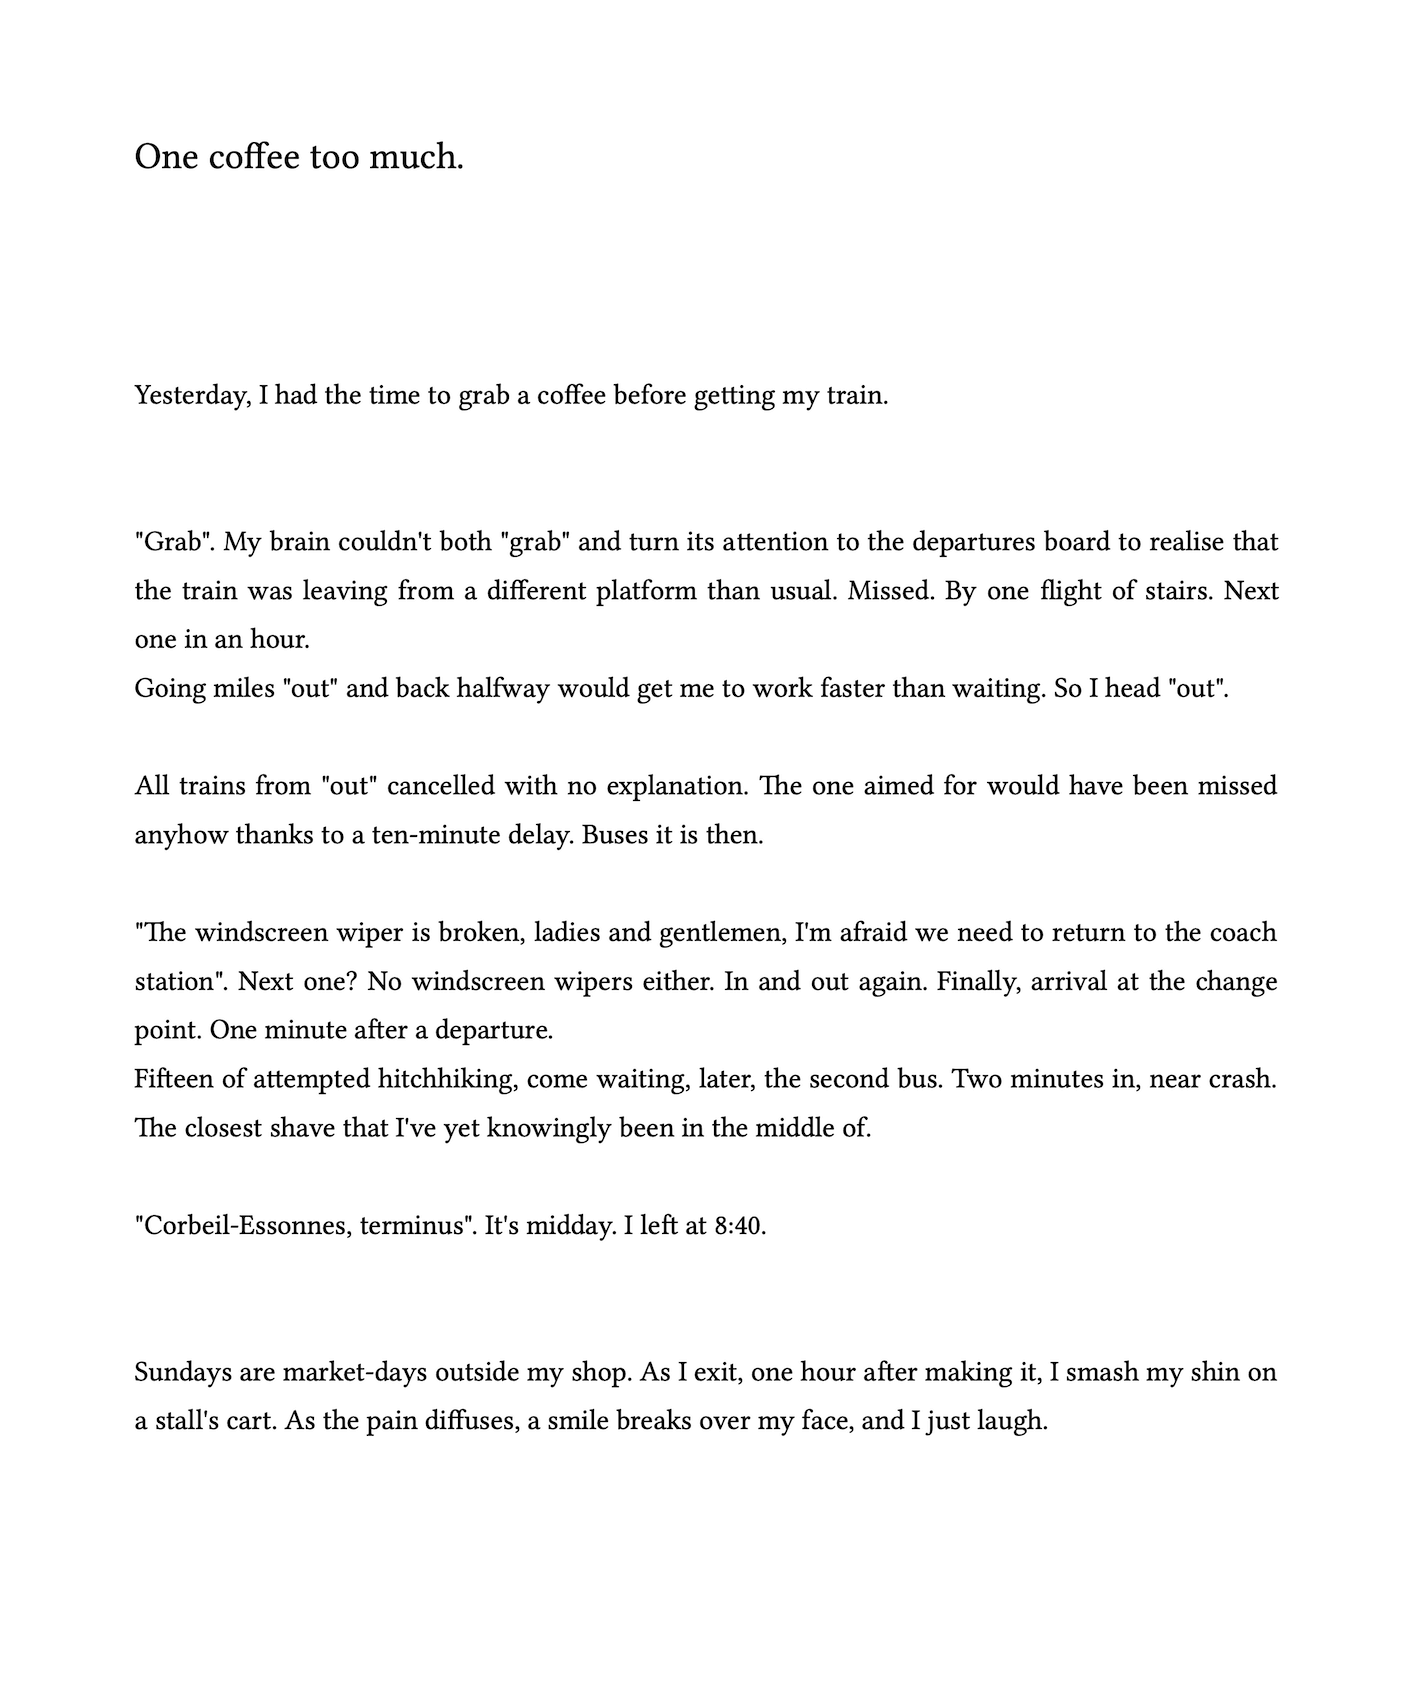 poem: One coffee too much